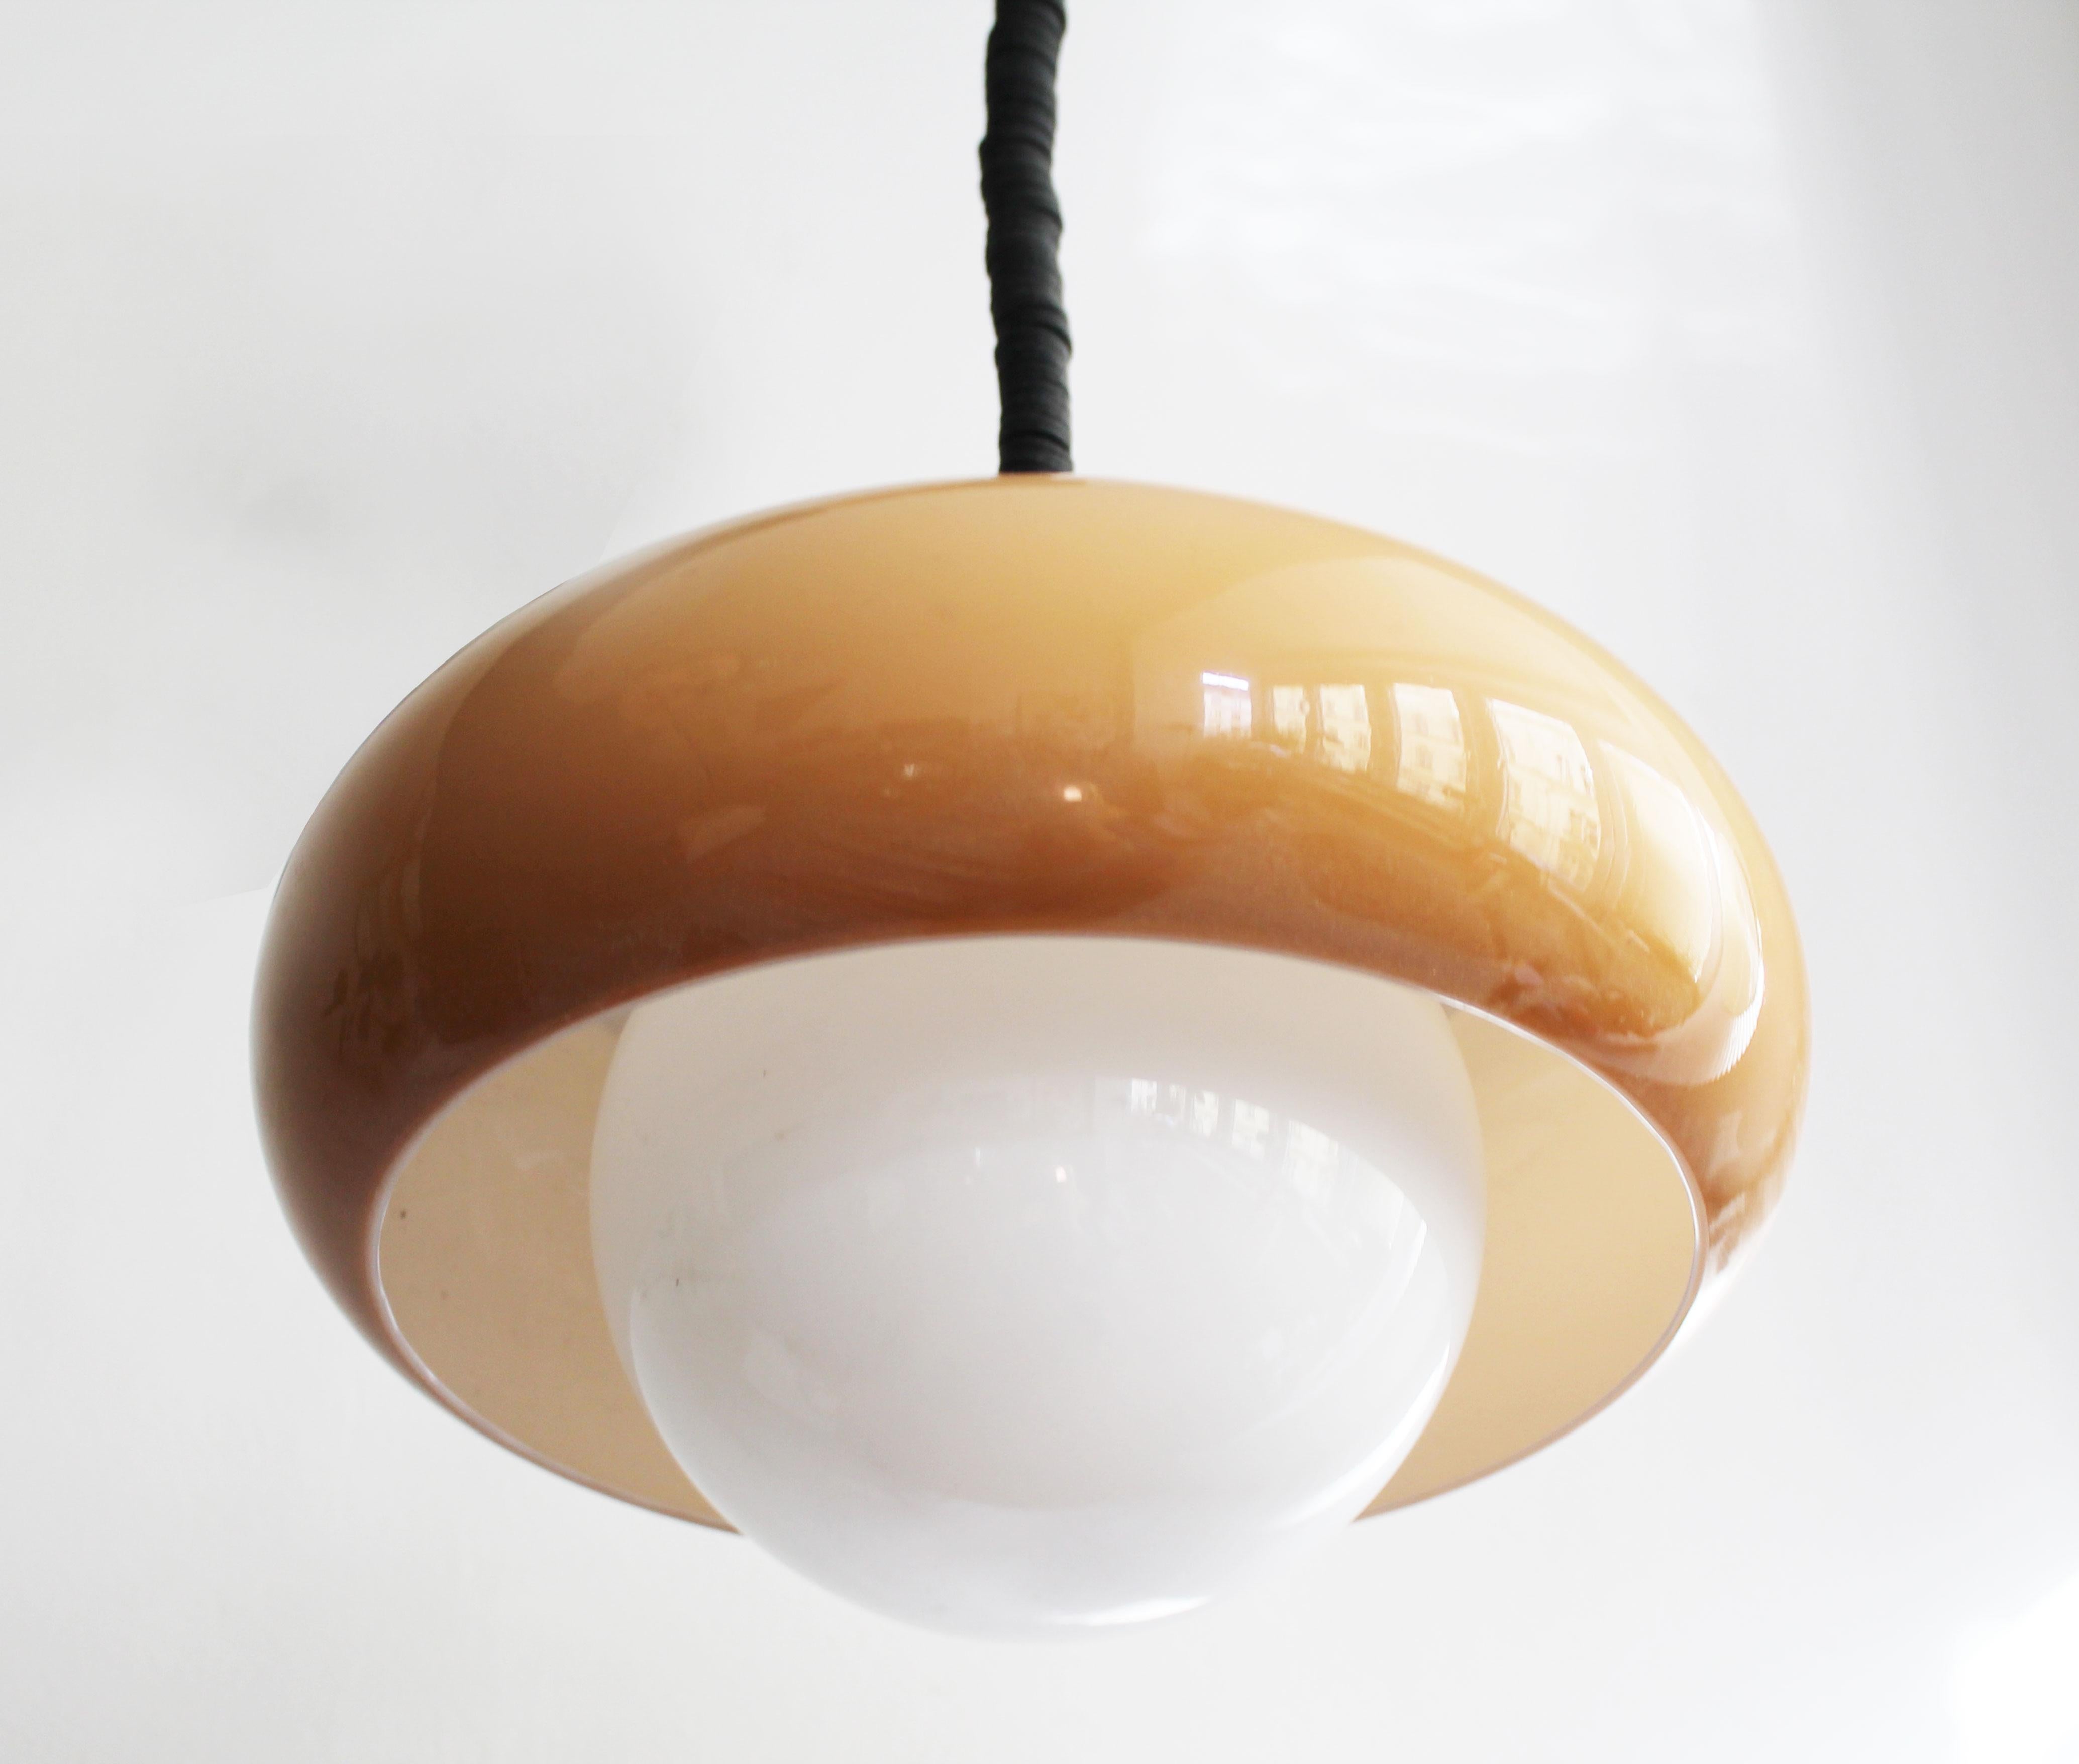 This is an original ceiling lamp designed by Guzzini brothers and produced by their namesake company during the 1970’s.

Guzzini company was originally founded in 1959 by Raimondo Guzzini and at that time it focused purely on producing decorative